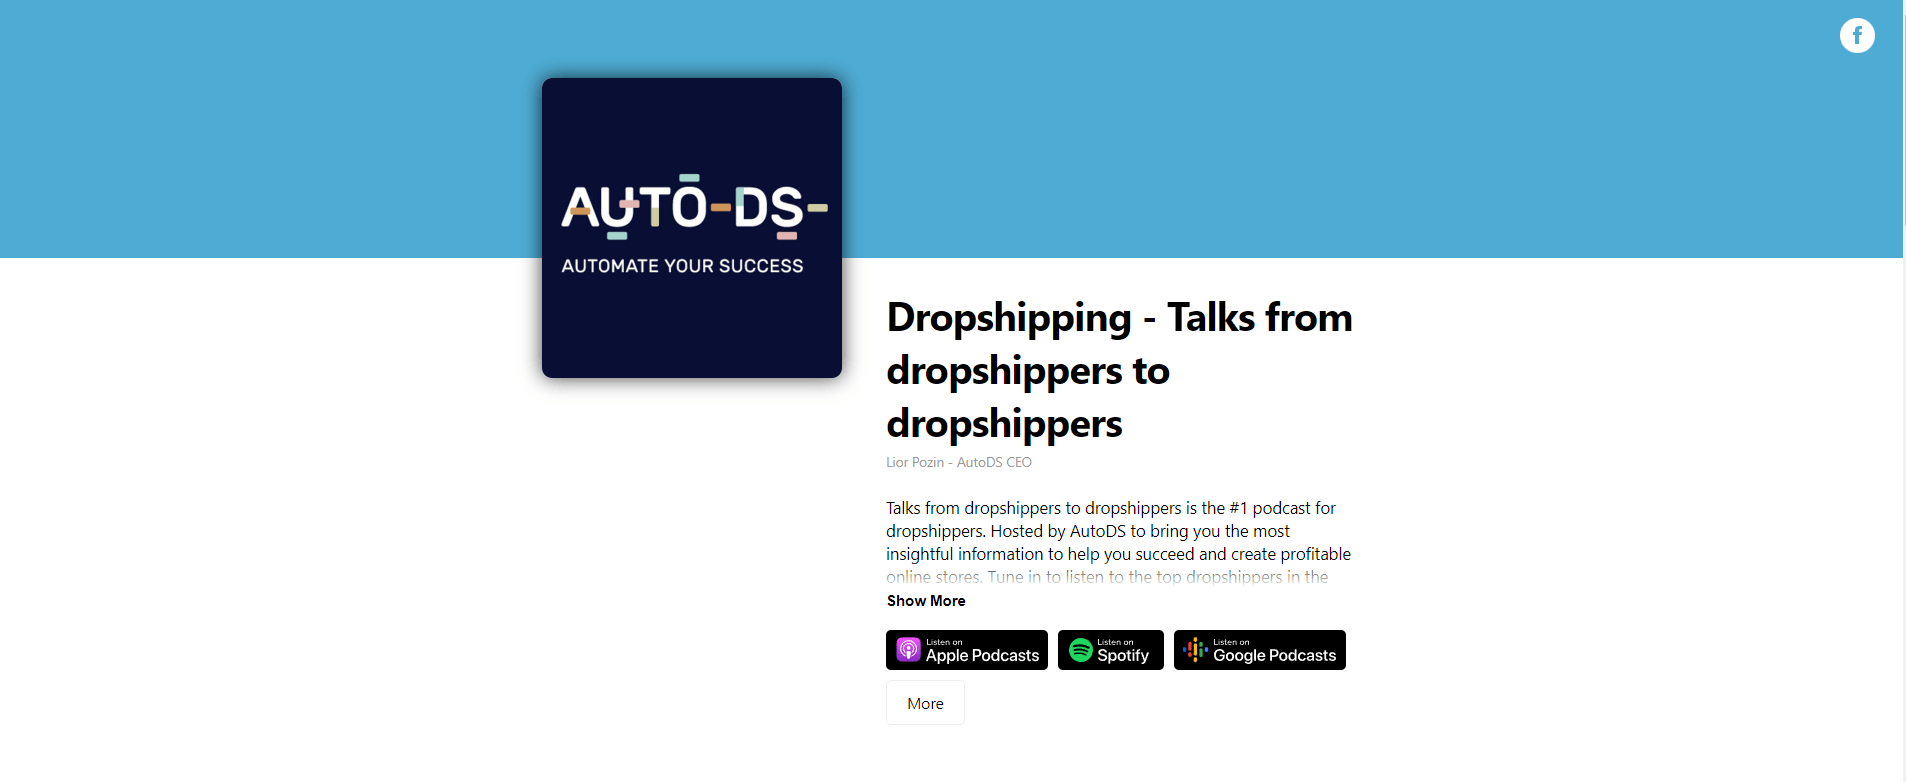 Dropshipping Talks from dropshippers to dropshippers